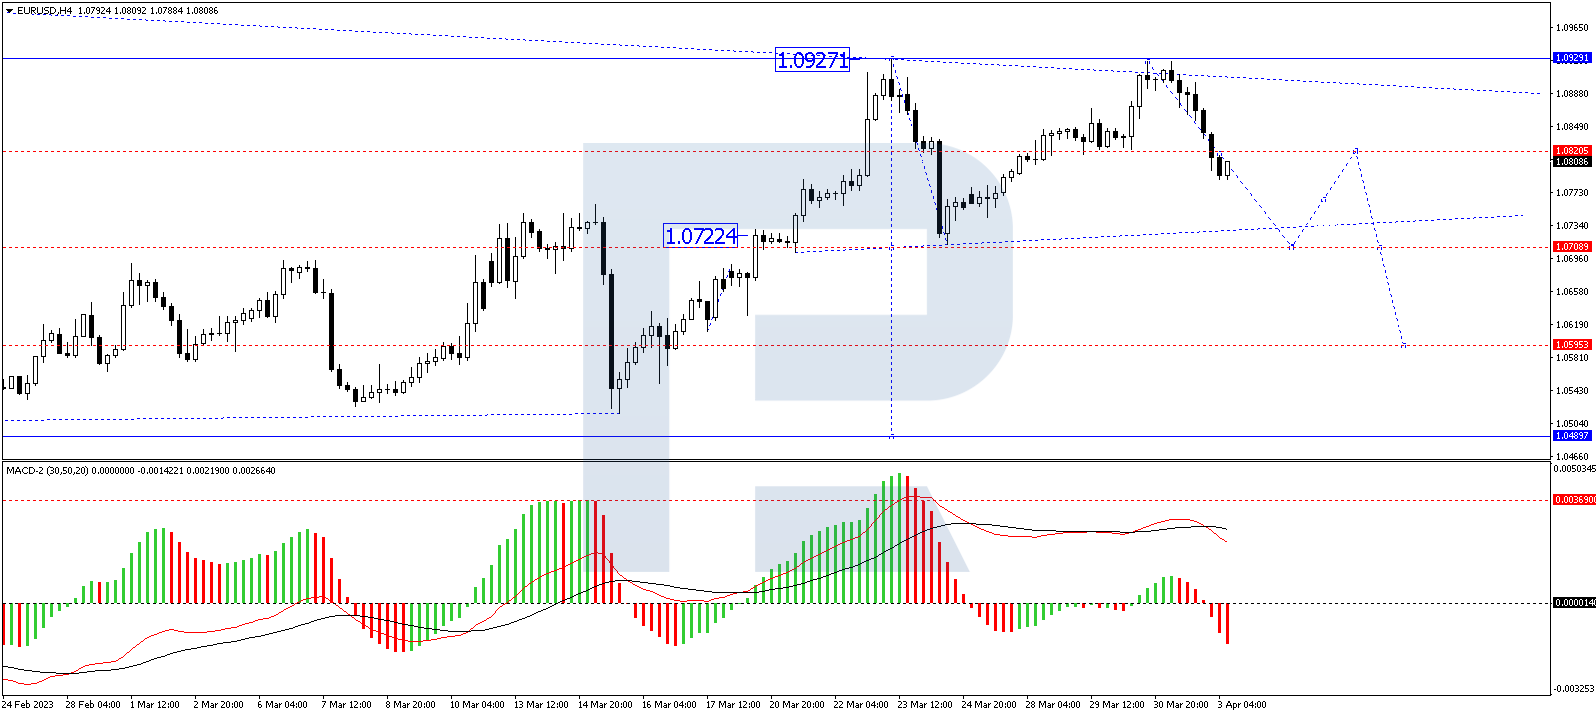 EUR/USD pair has formed a structure of a declining impulse to 1.0788 on H4